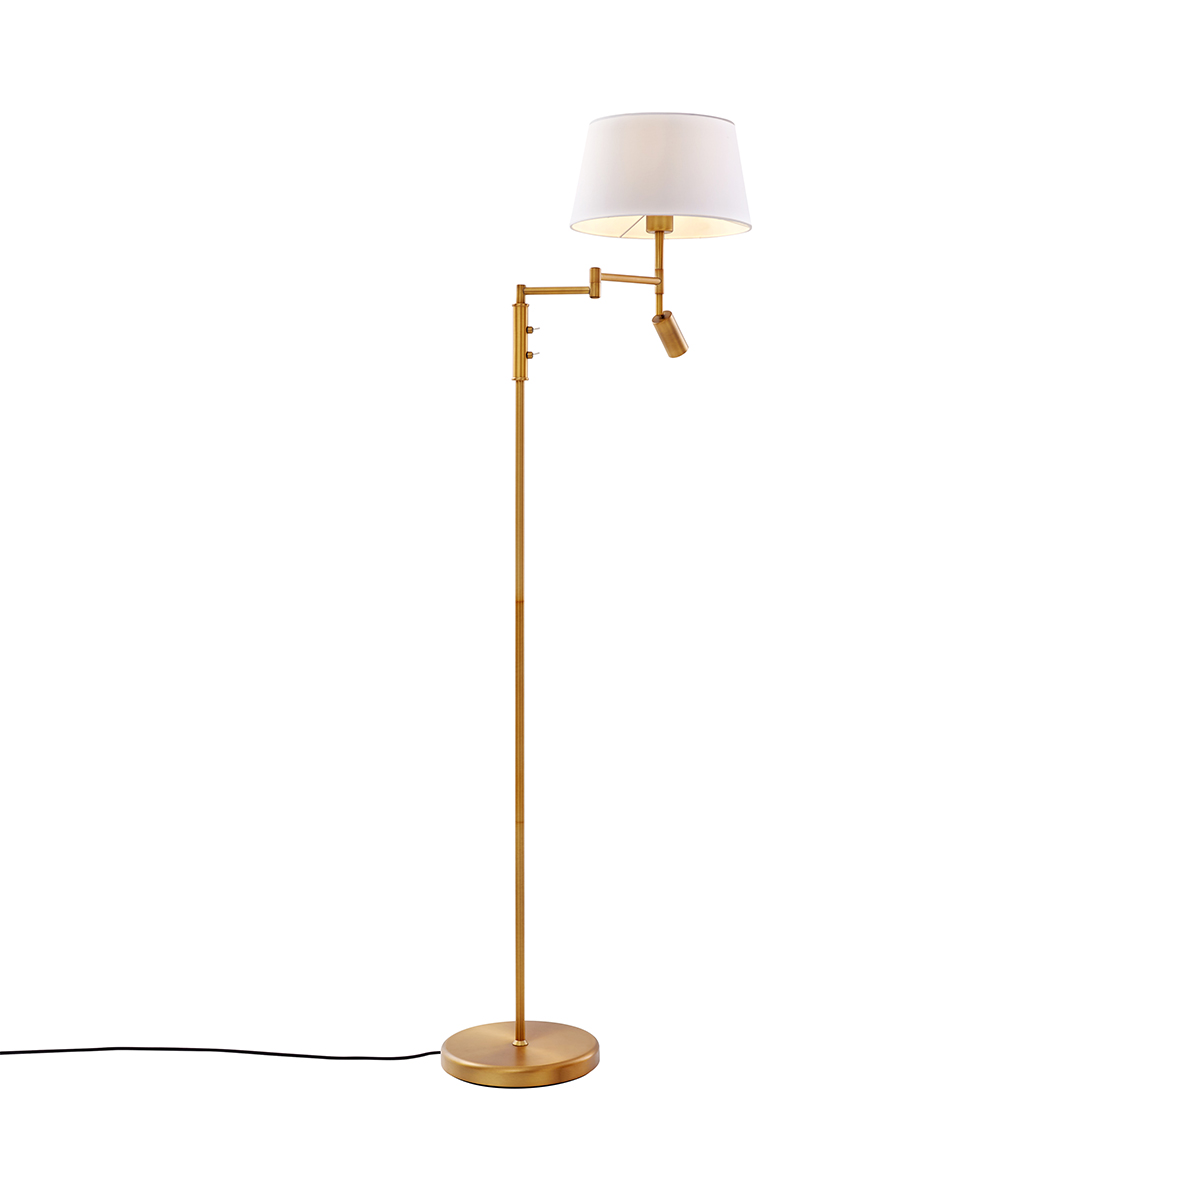 Bronze floor lamp with white shade and adjustable reading lamp - Ladas